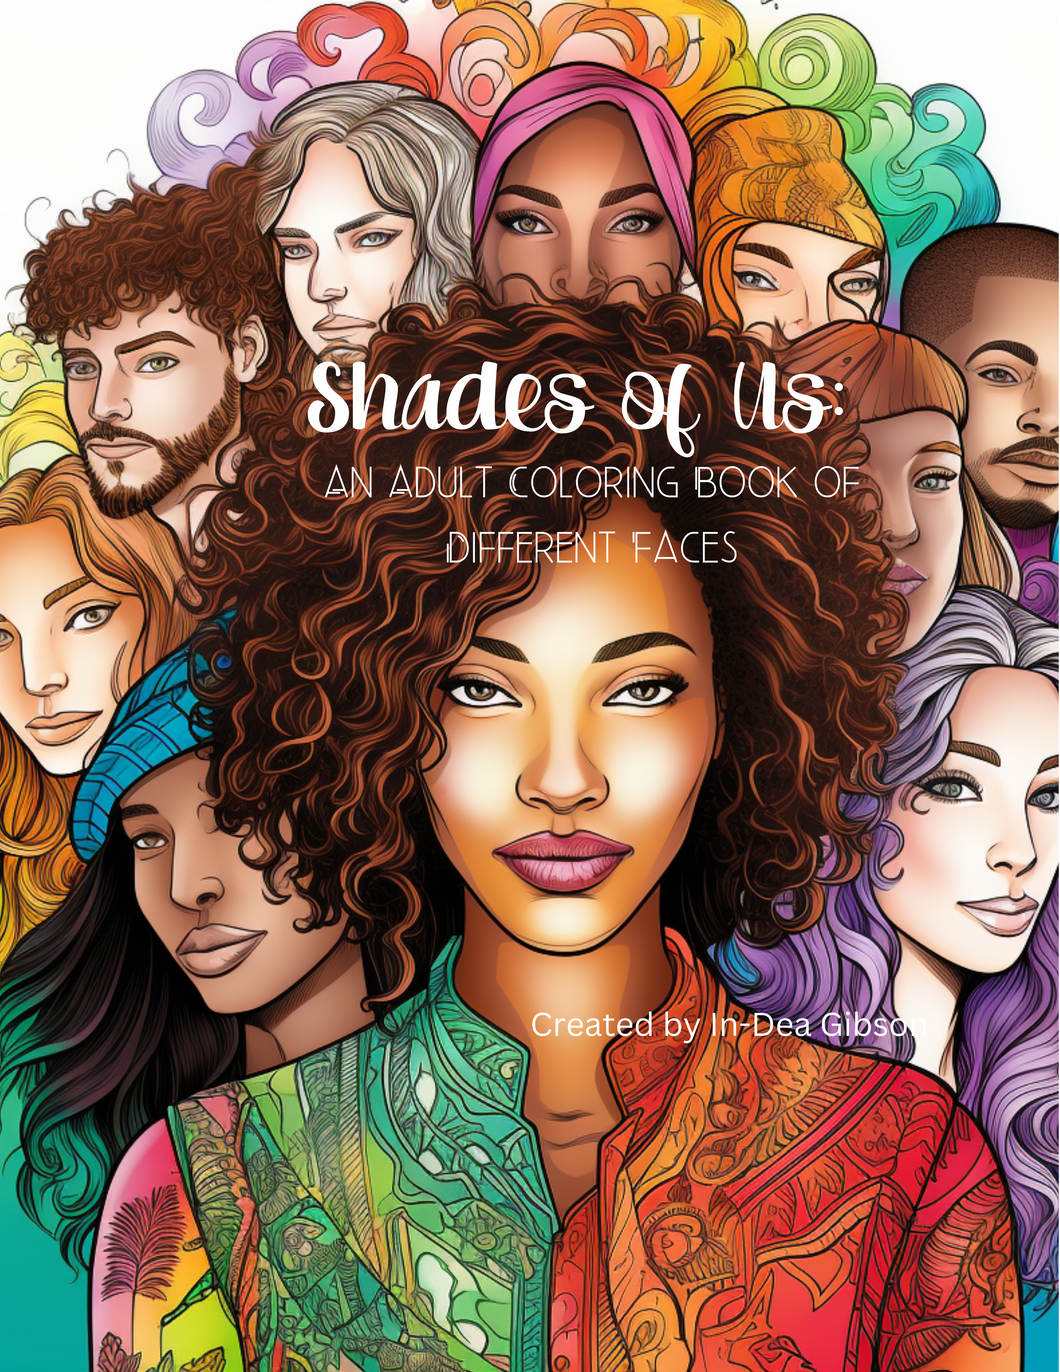 Shades of Us; Adult Coloring Book